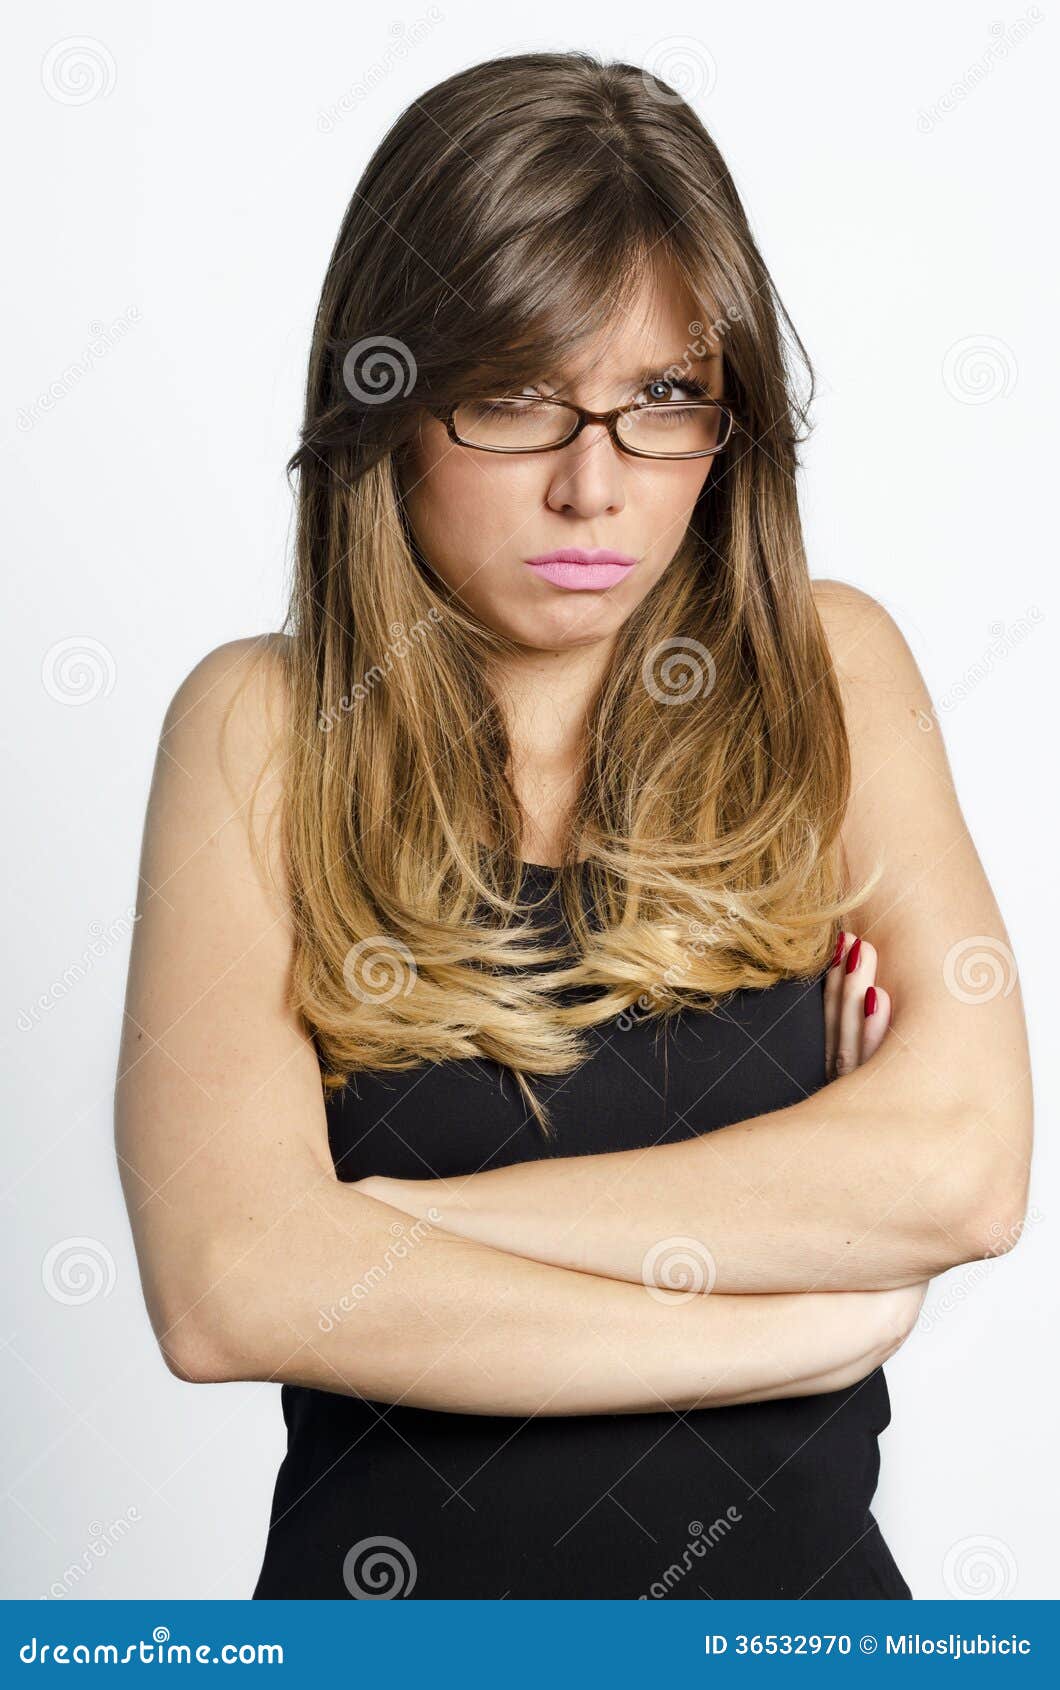 pouty-girl-pouting-teenage-teenage-standing-her-arms-crossed-looking-frustrated-stubborn-36532970.jpg